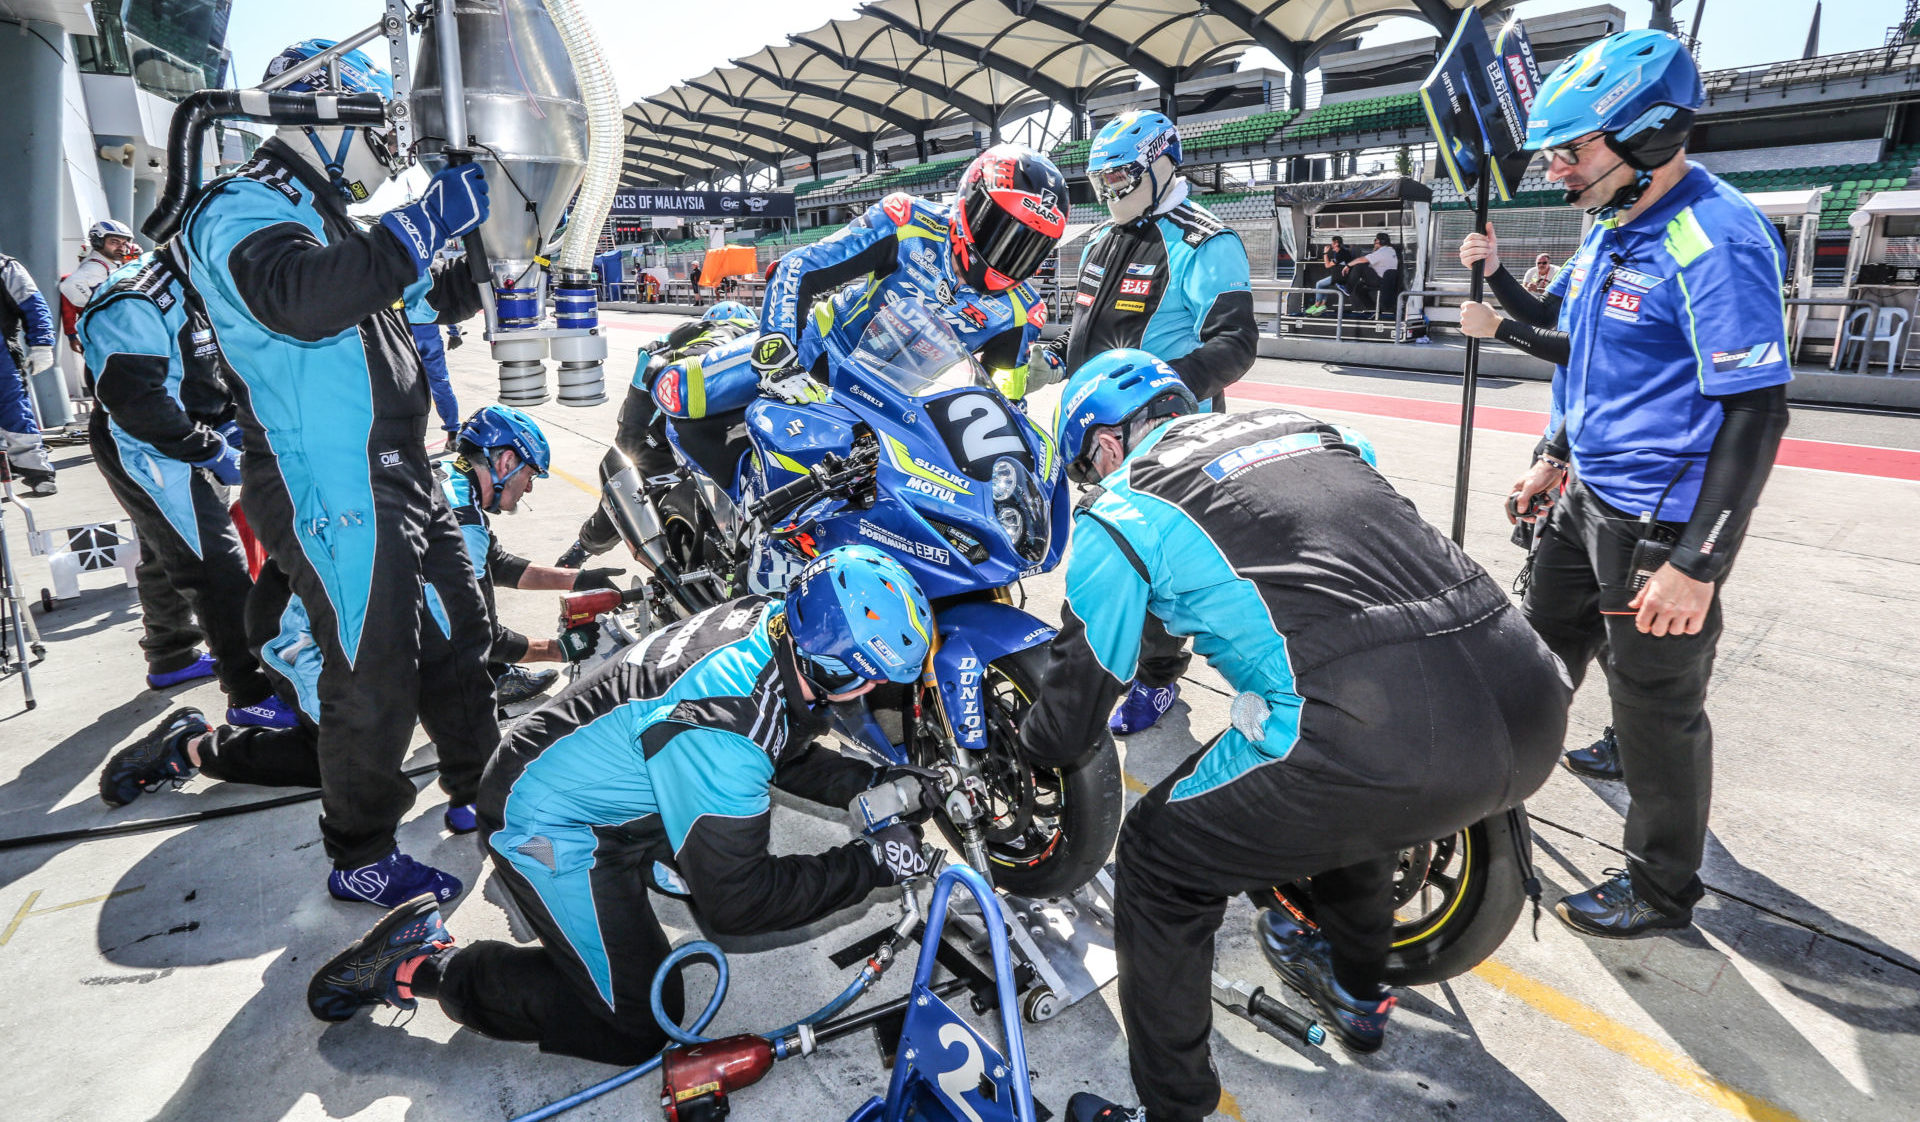 Retaliate Flock Port World Endurance: A Look At The 2019-2020 Championship After Two Rounds -  Roadracing World Magazine | Motorcycle Riding, Racing & Tech News